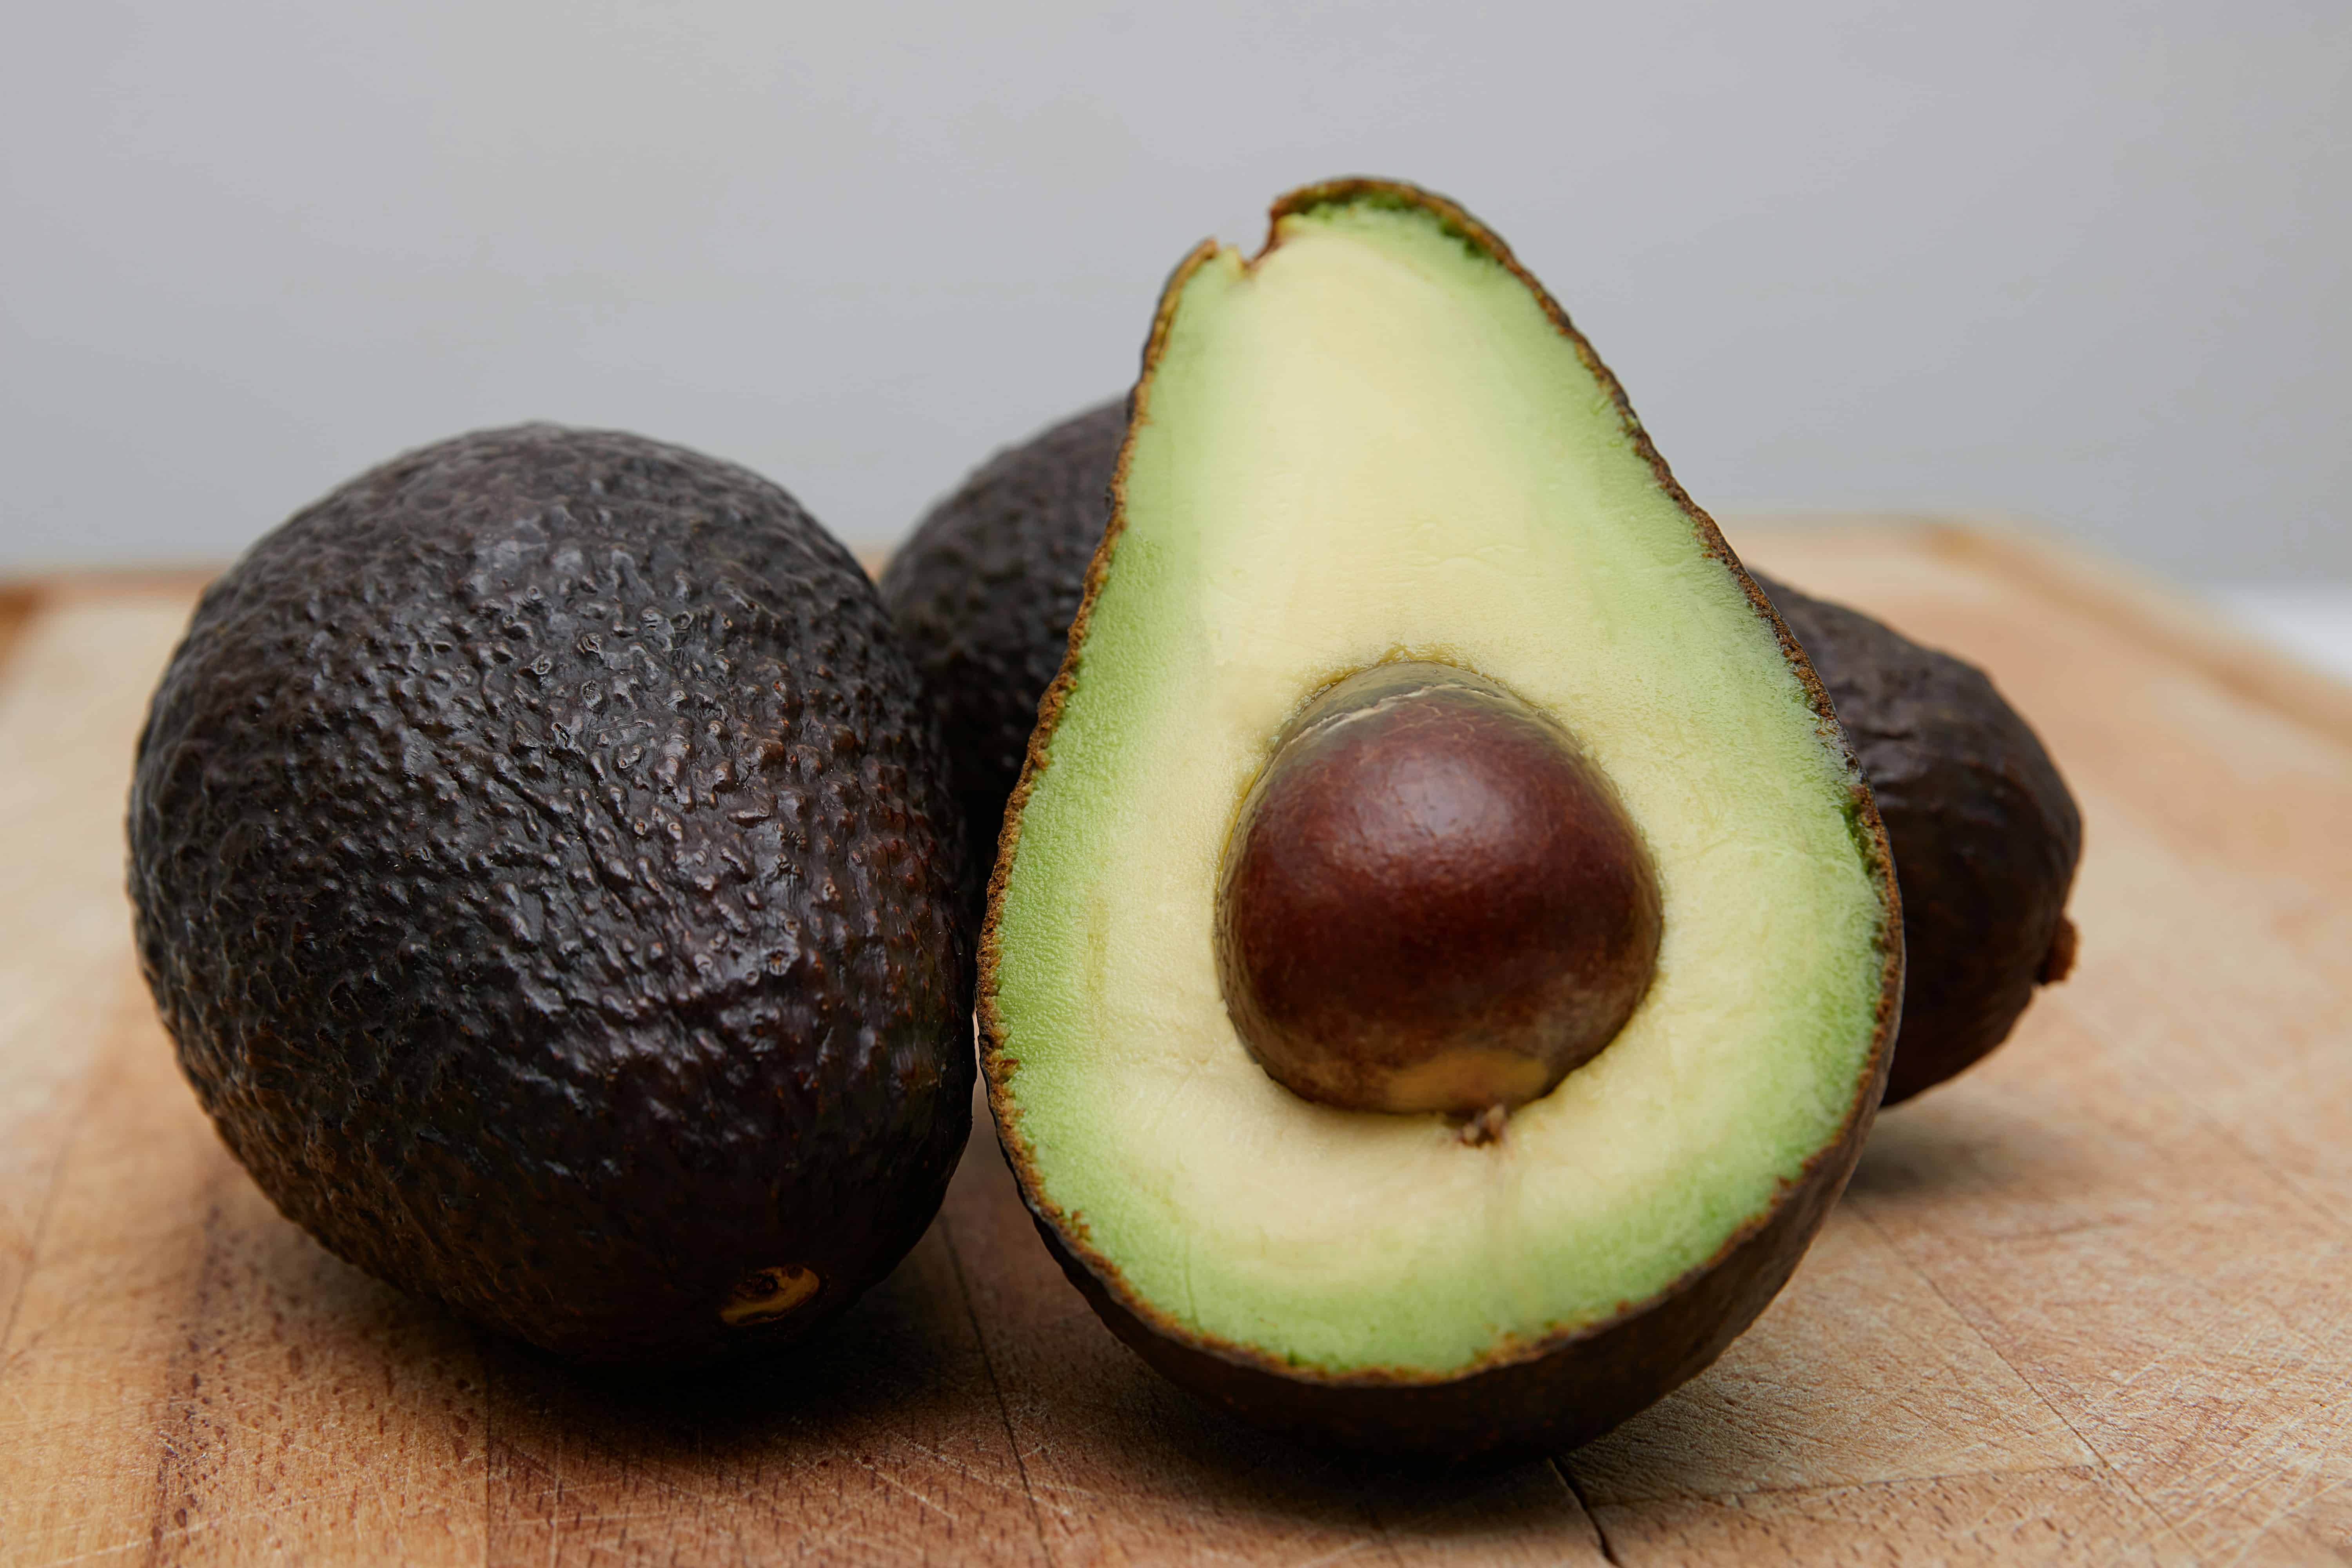 A sliced avocado on a wooden table